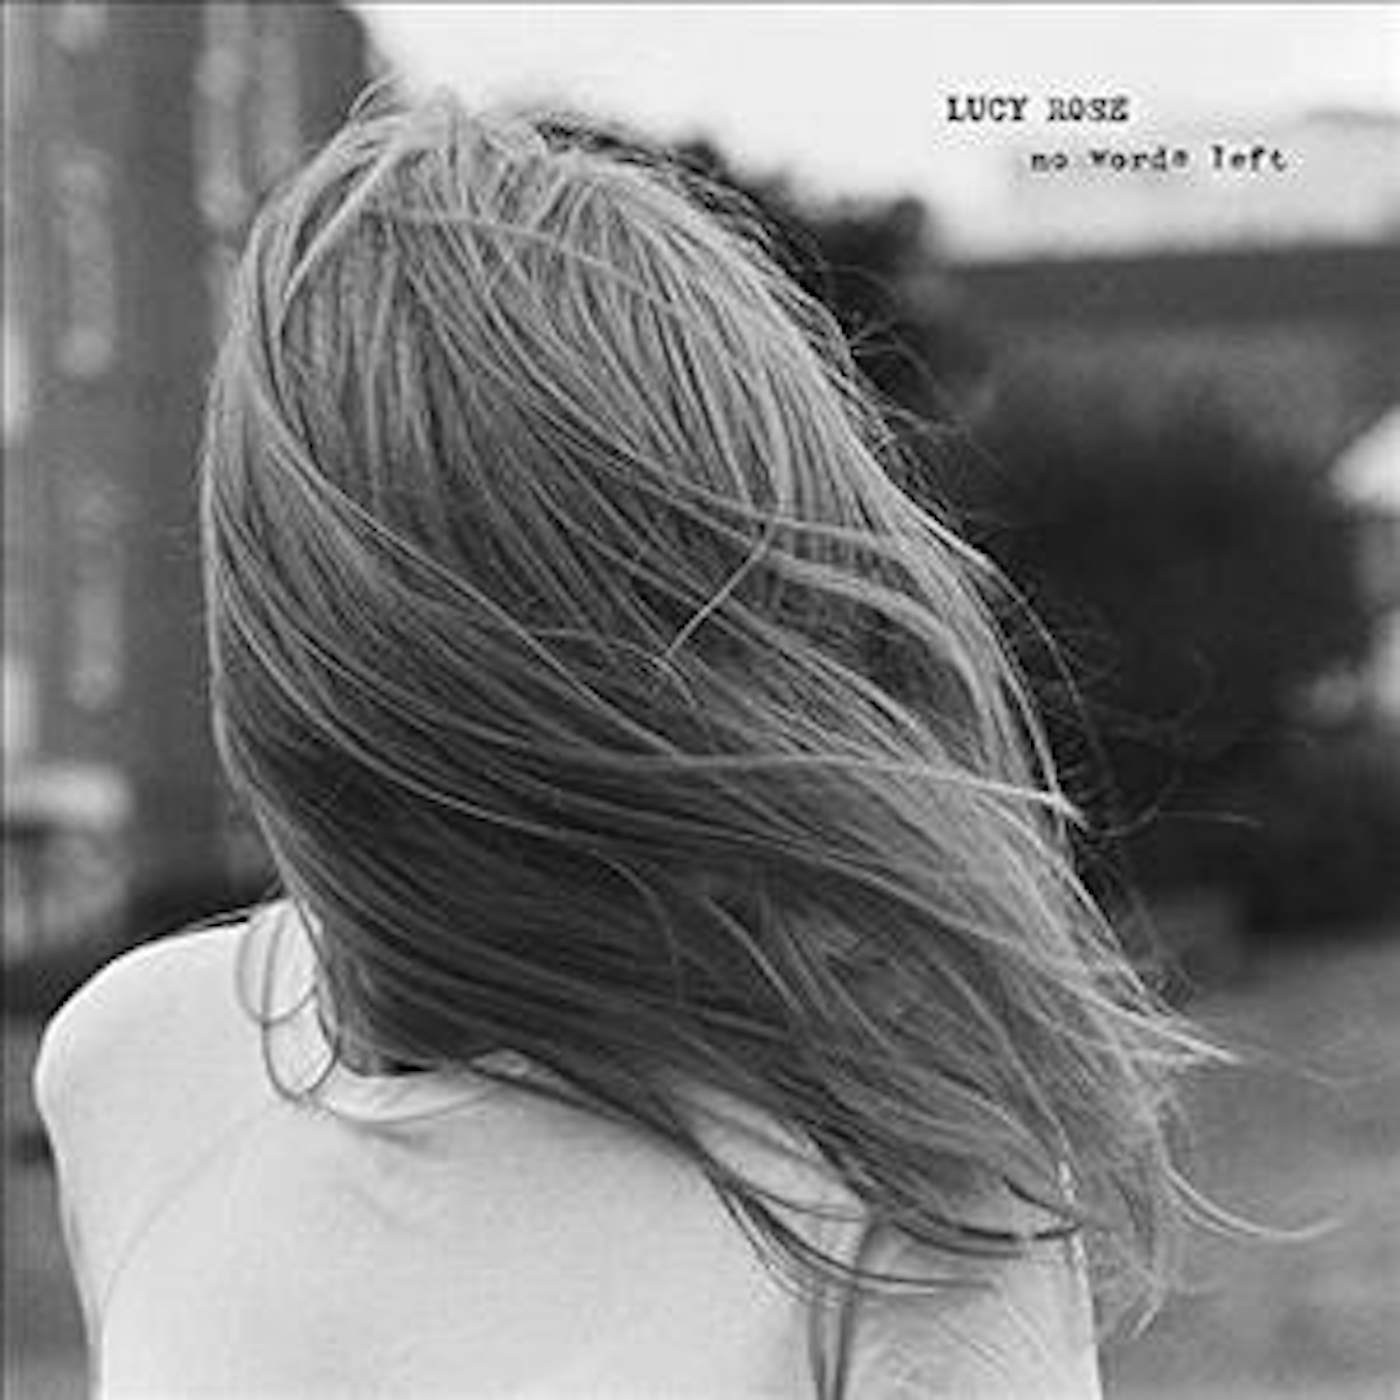 Lucy Rose NO WORDS LEFT CD